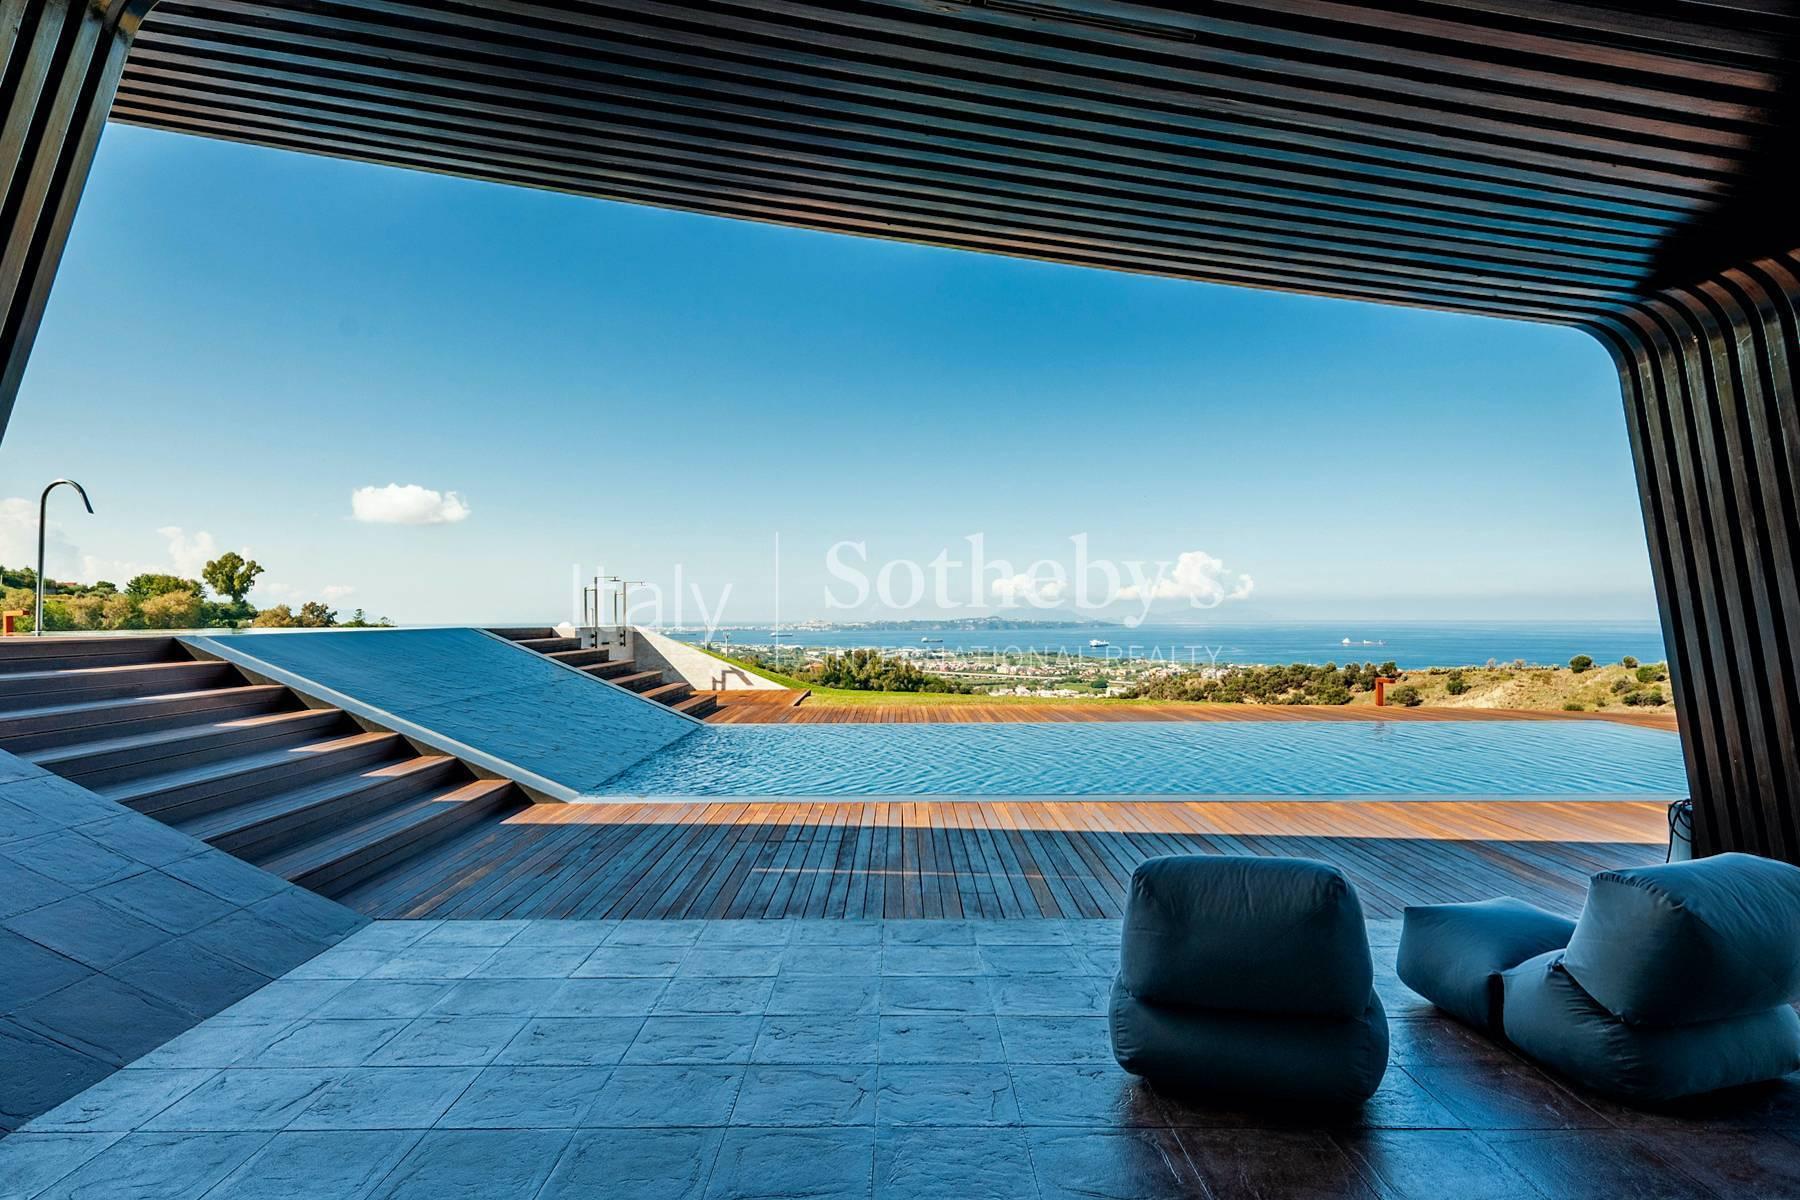 Exclusive modern villa with pool overlooking the sea - 5